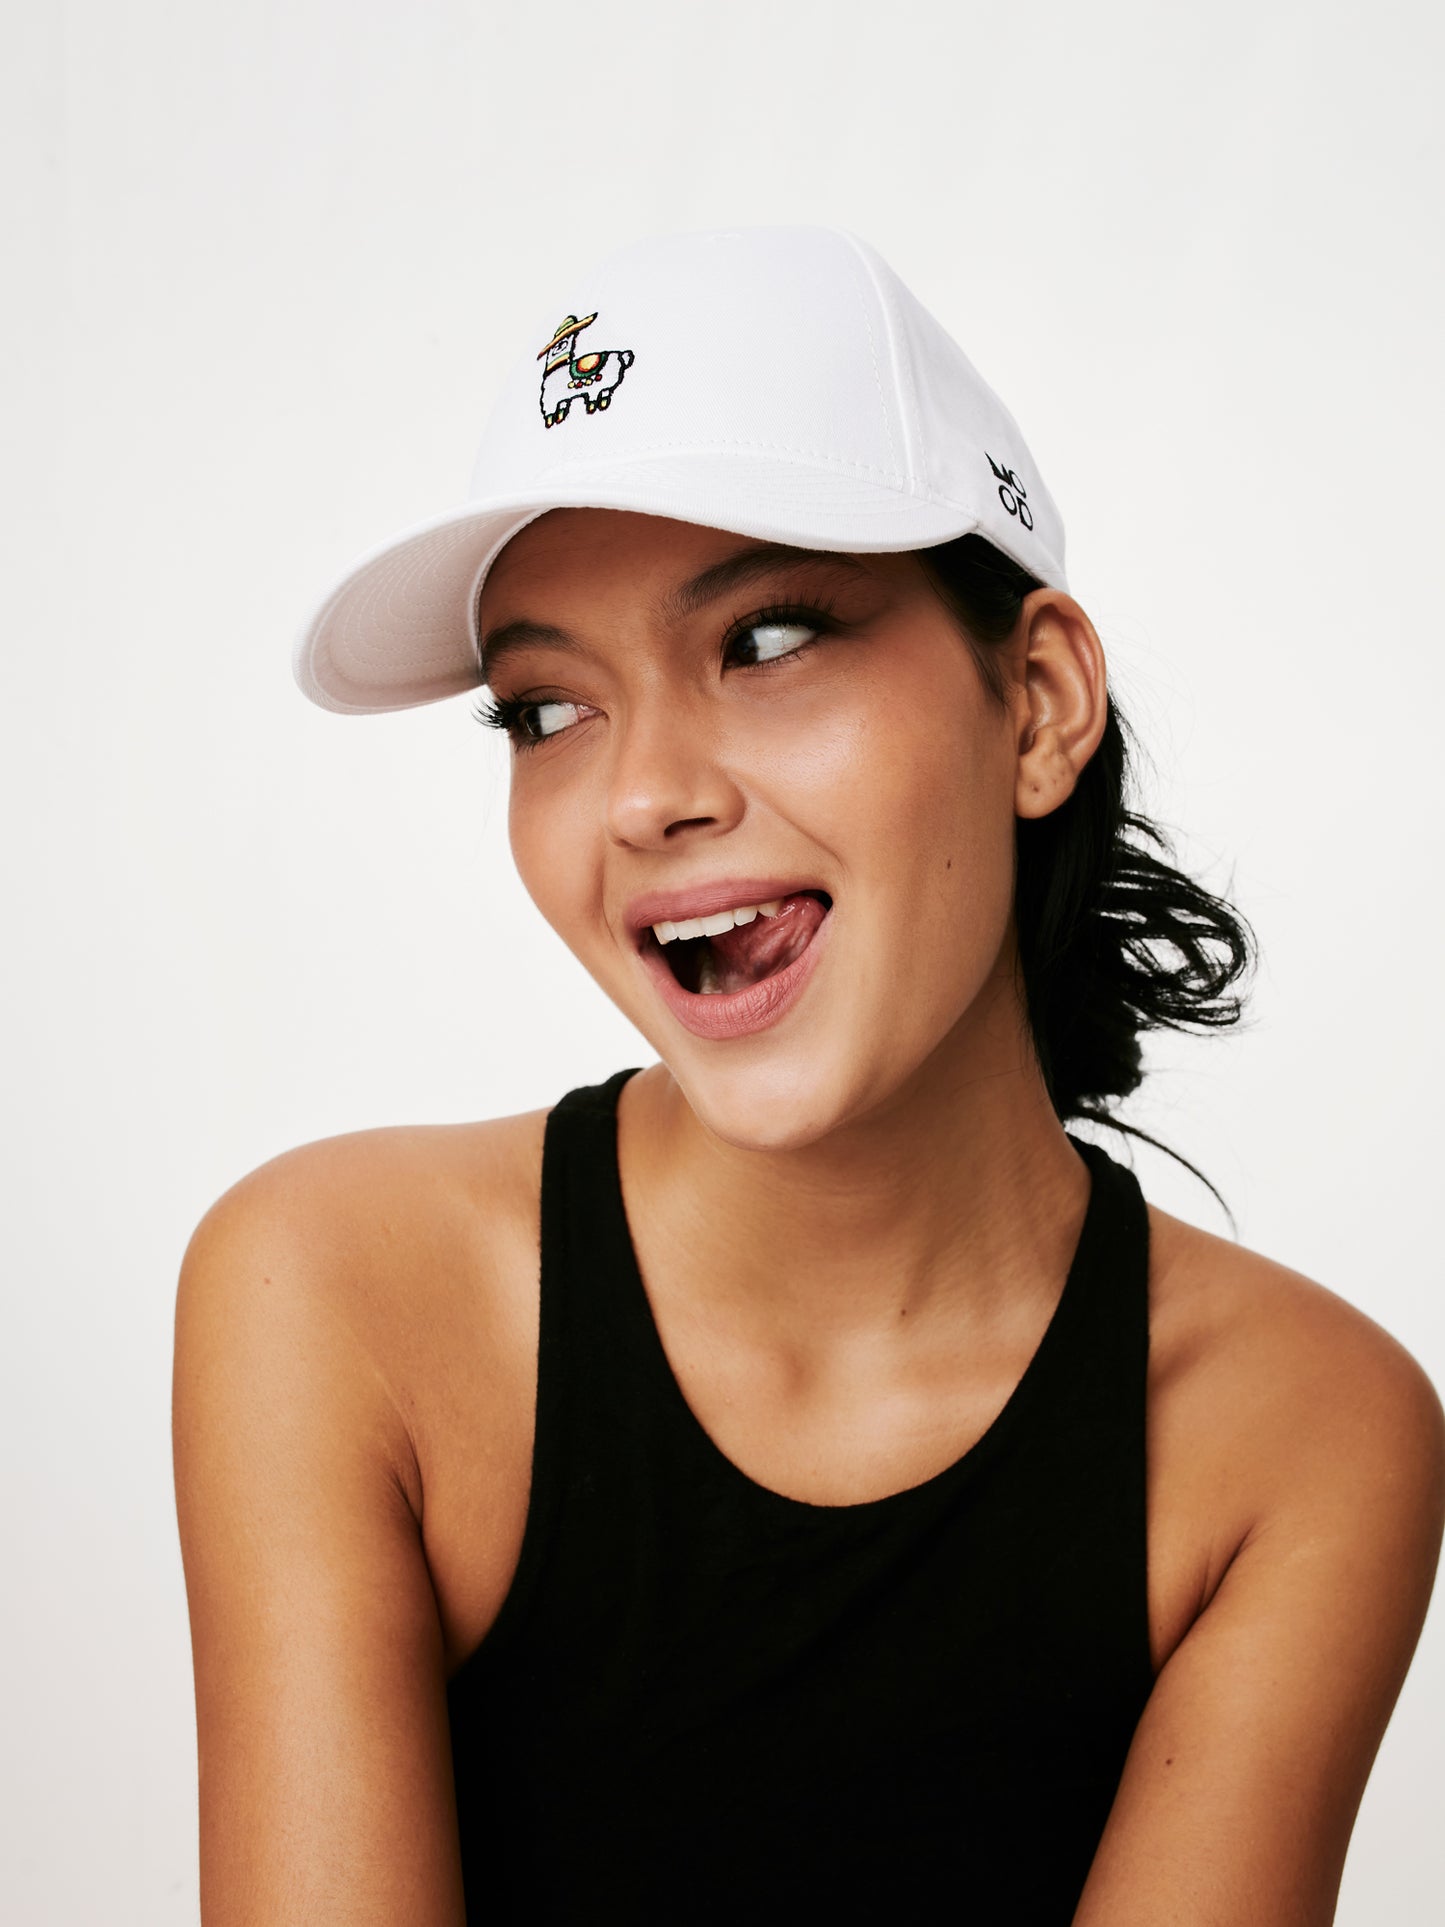 MOOD female model wearing Mexillama baseball cap in white color product shoot, looking cheeky